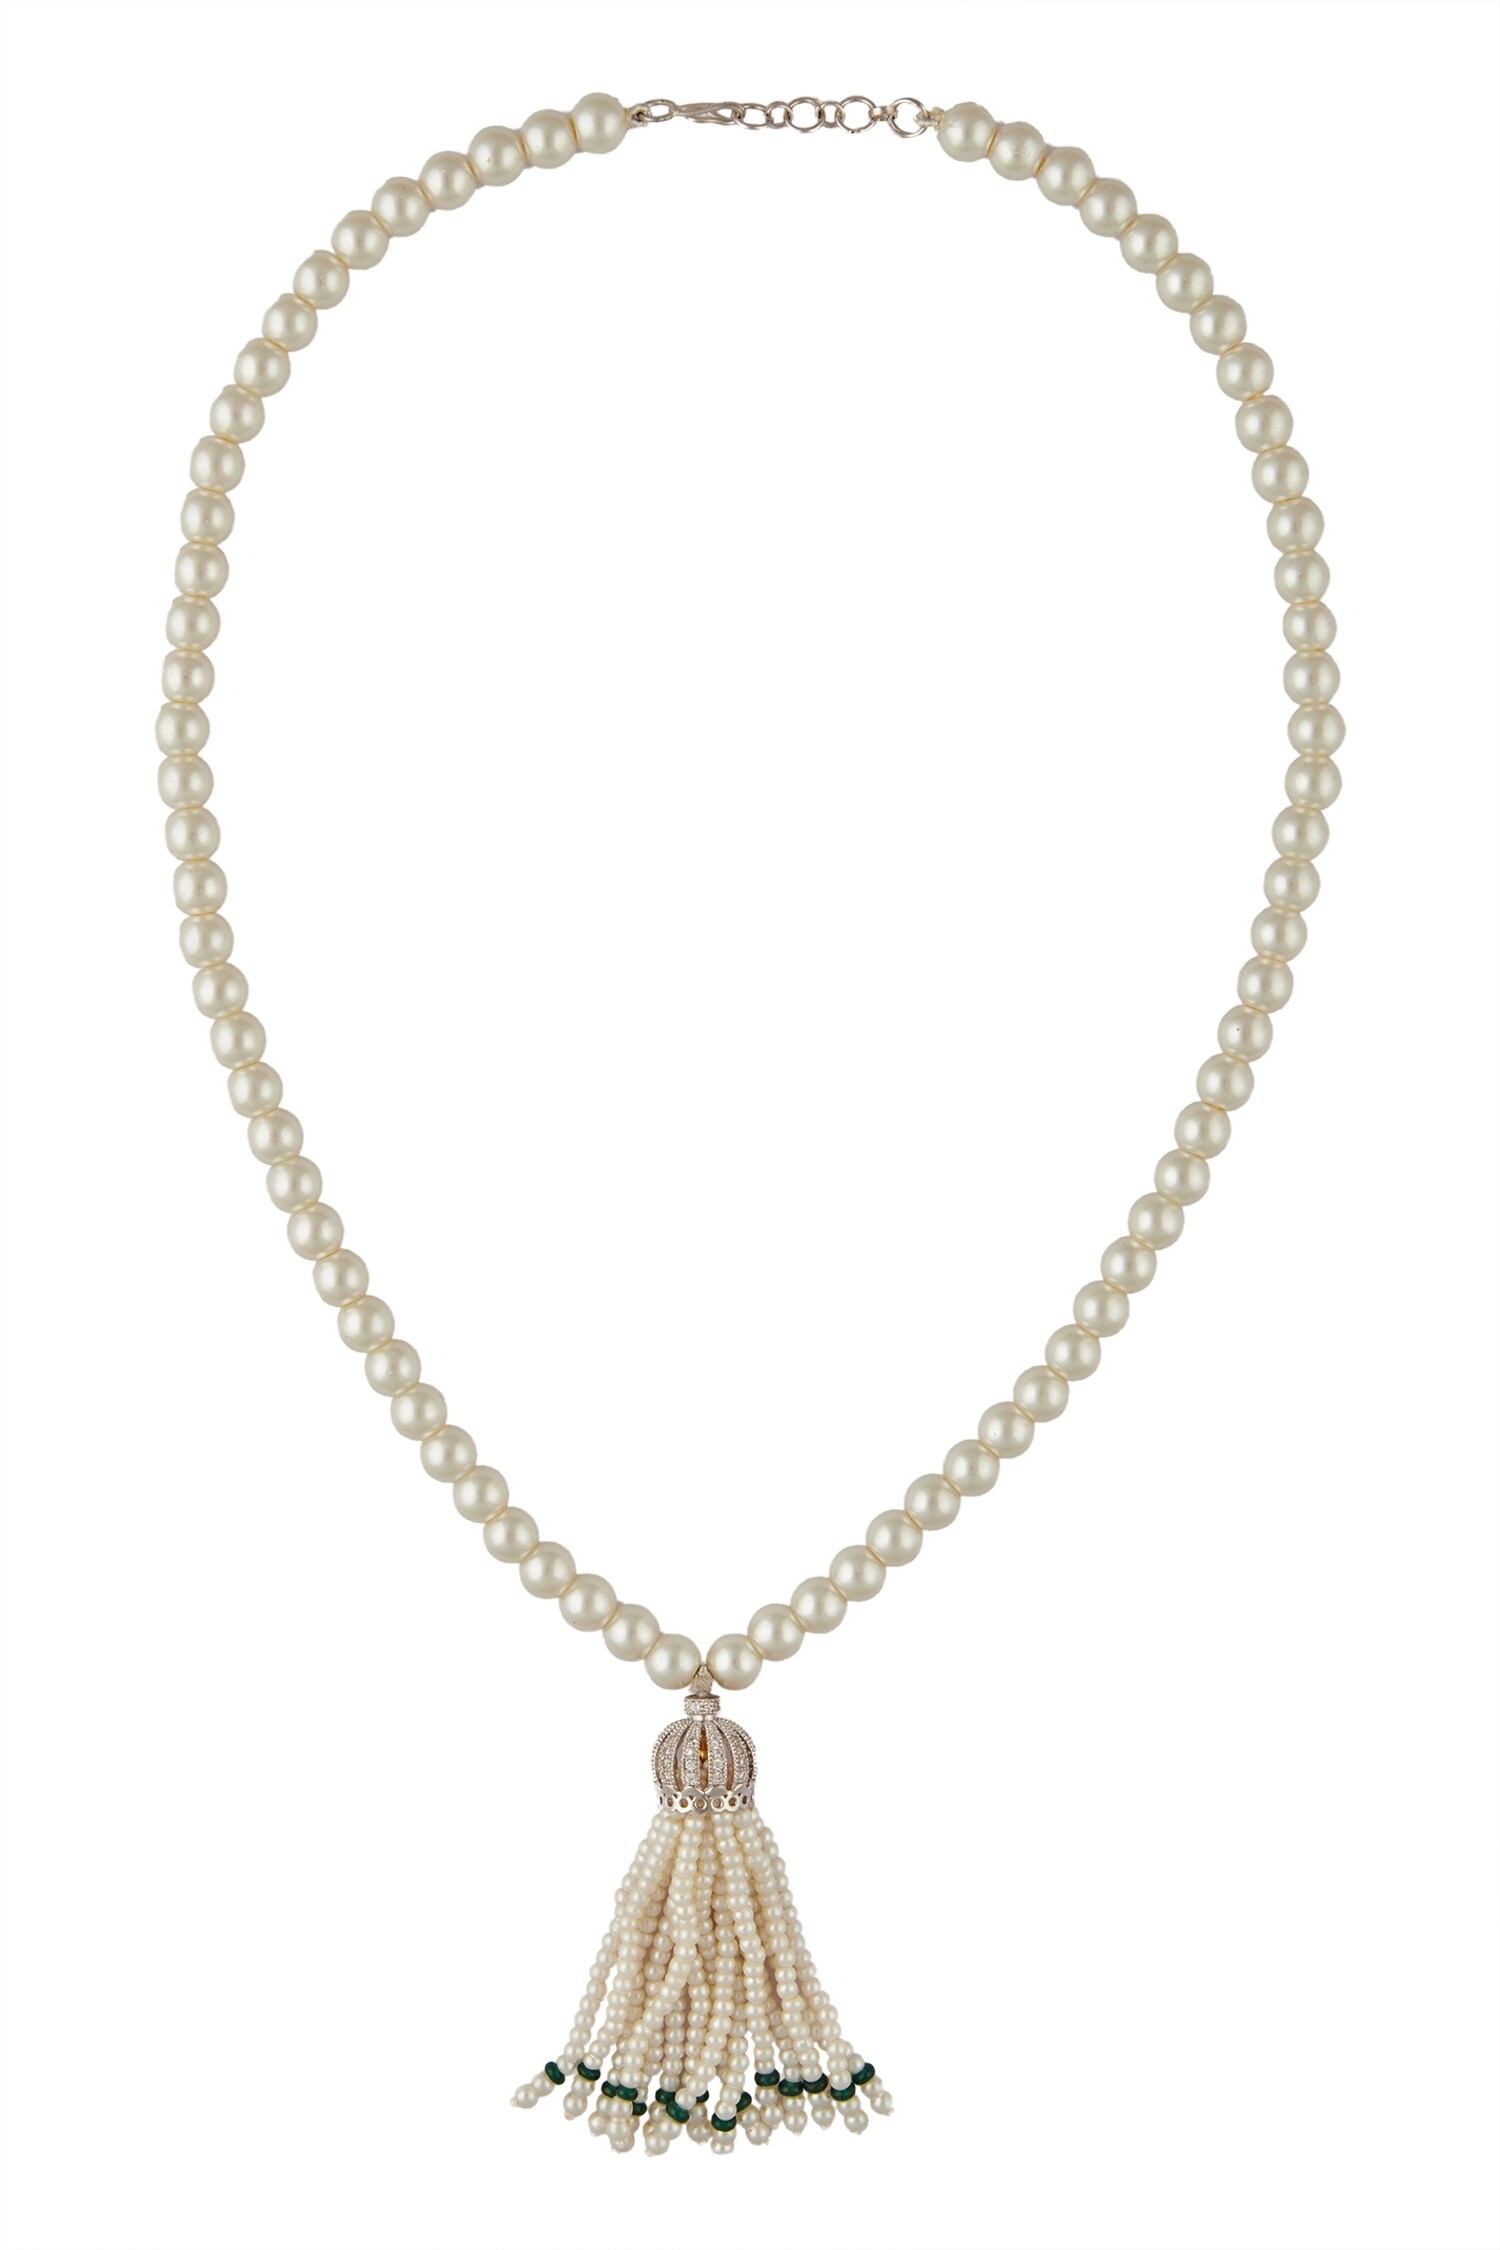 The Zoya Kundan and Pearls Tassel Long Necklace – Curio Cottage